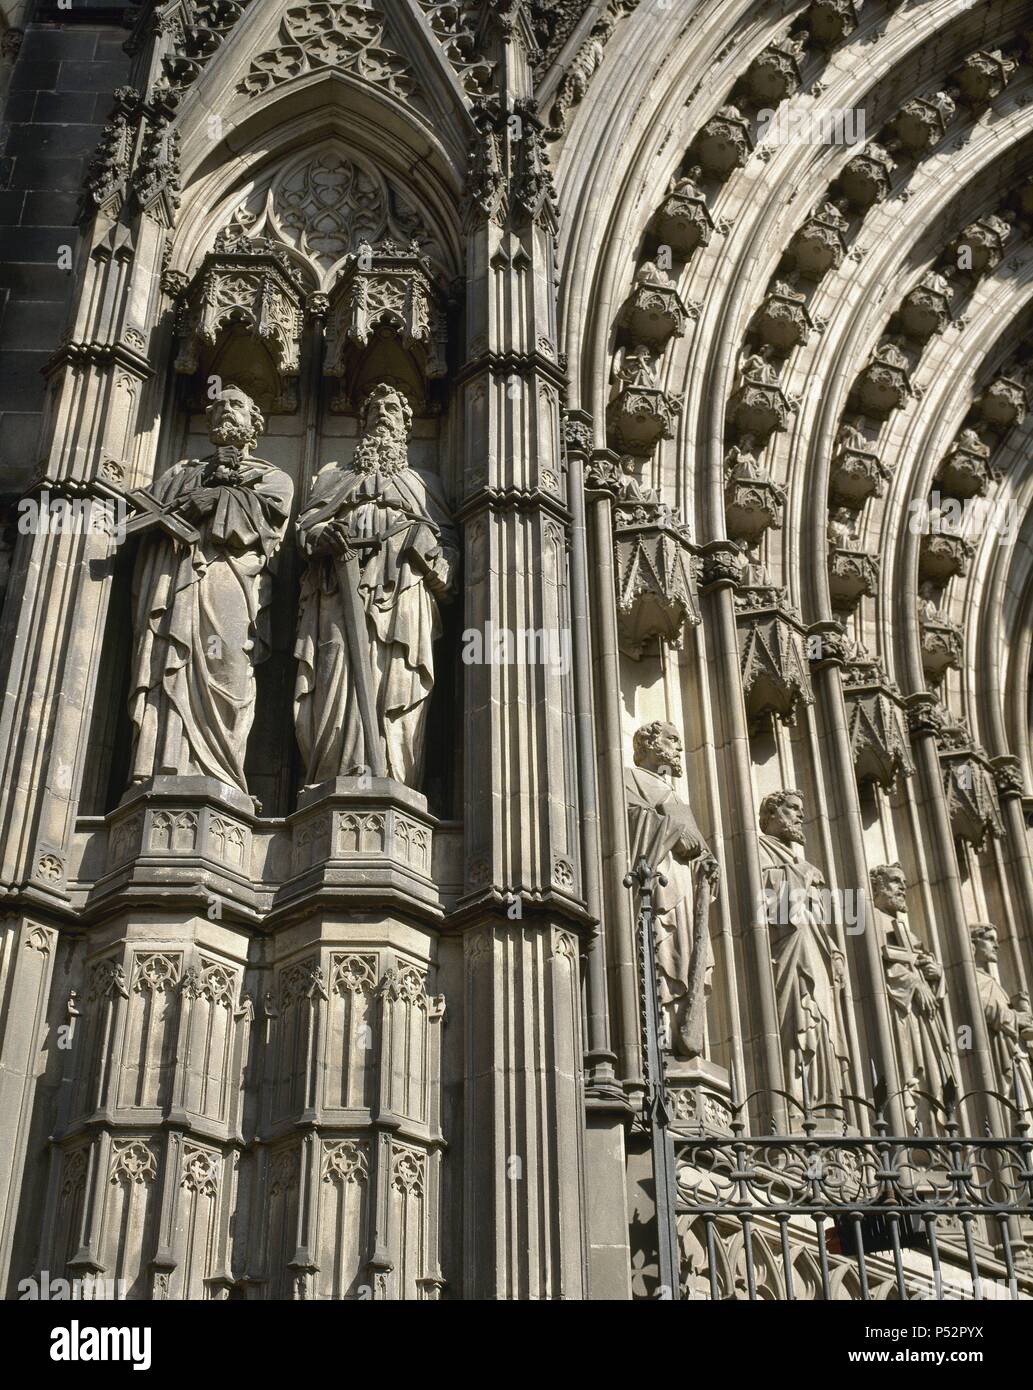 Spain. Barcelona. Cathedral. Archivolts. Detail. The facade was finally finished in the early 20th century, by the architects Josep Oriol Mestres (1815-1895) and August Font i Carreras (1846-1924). Neogothic style. Stock Photo